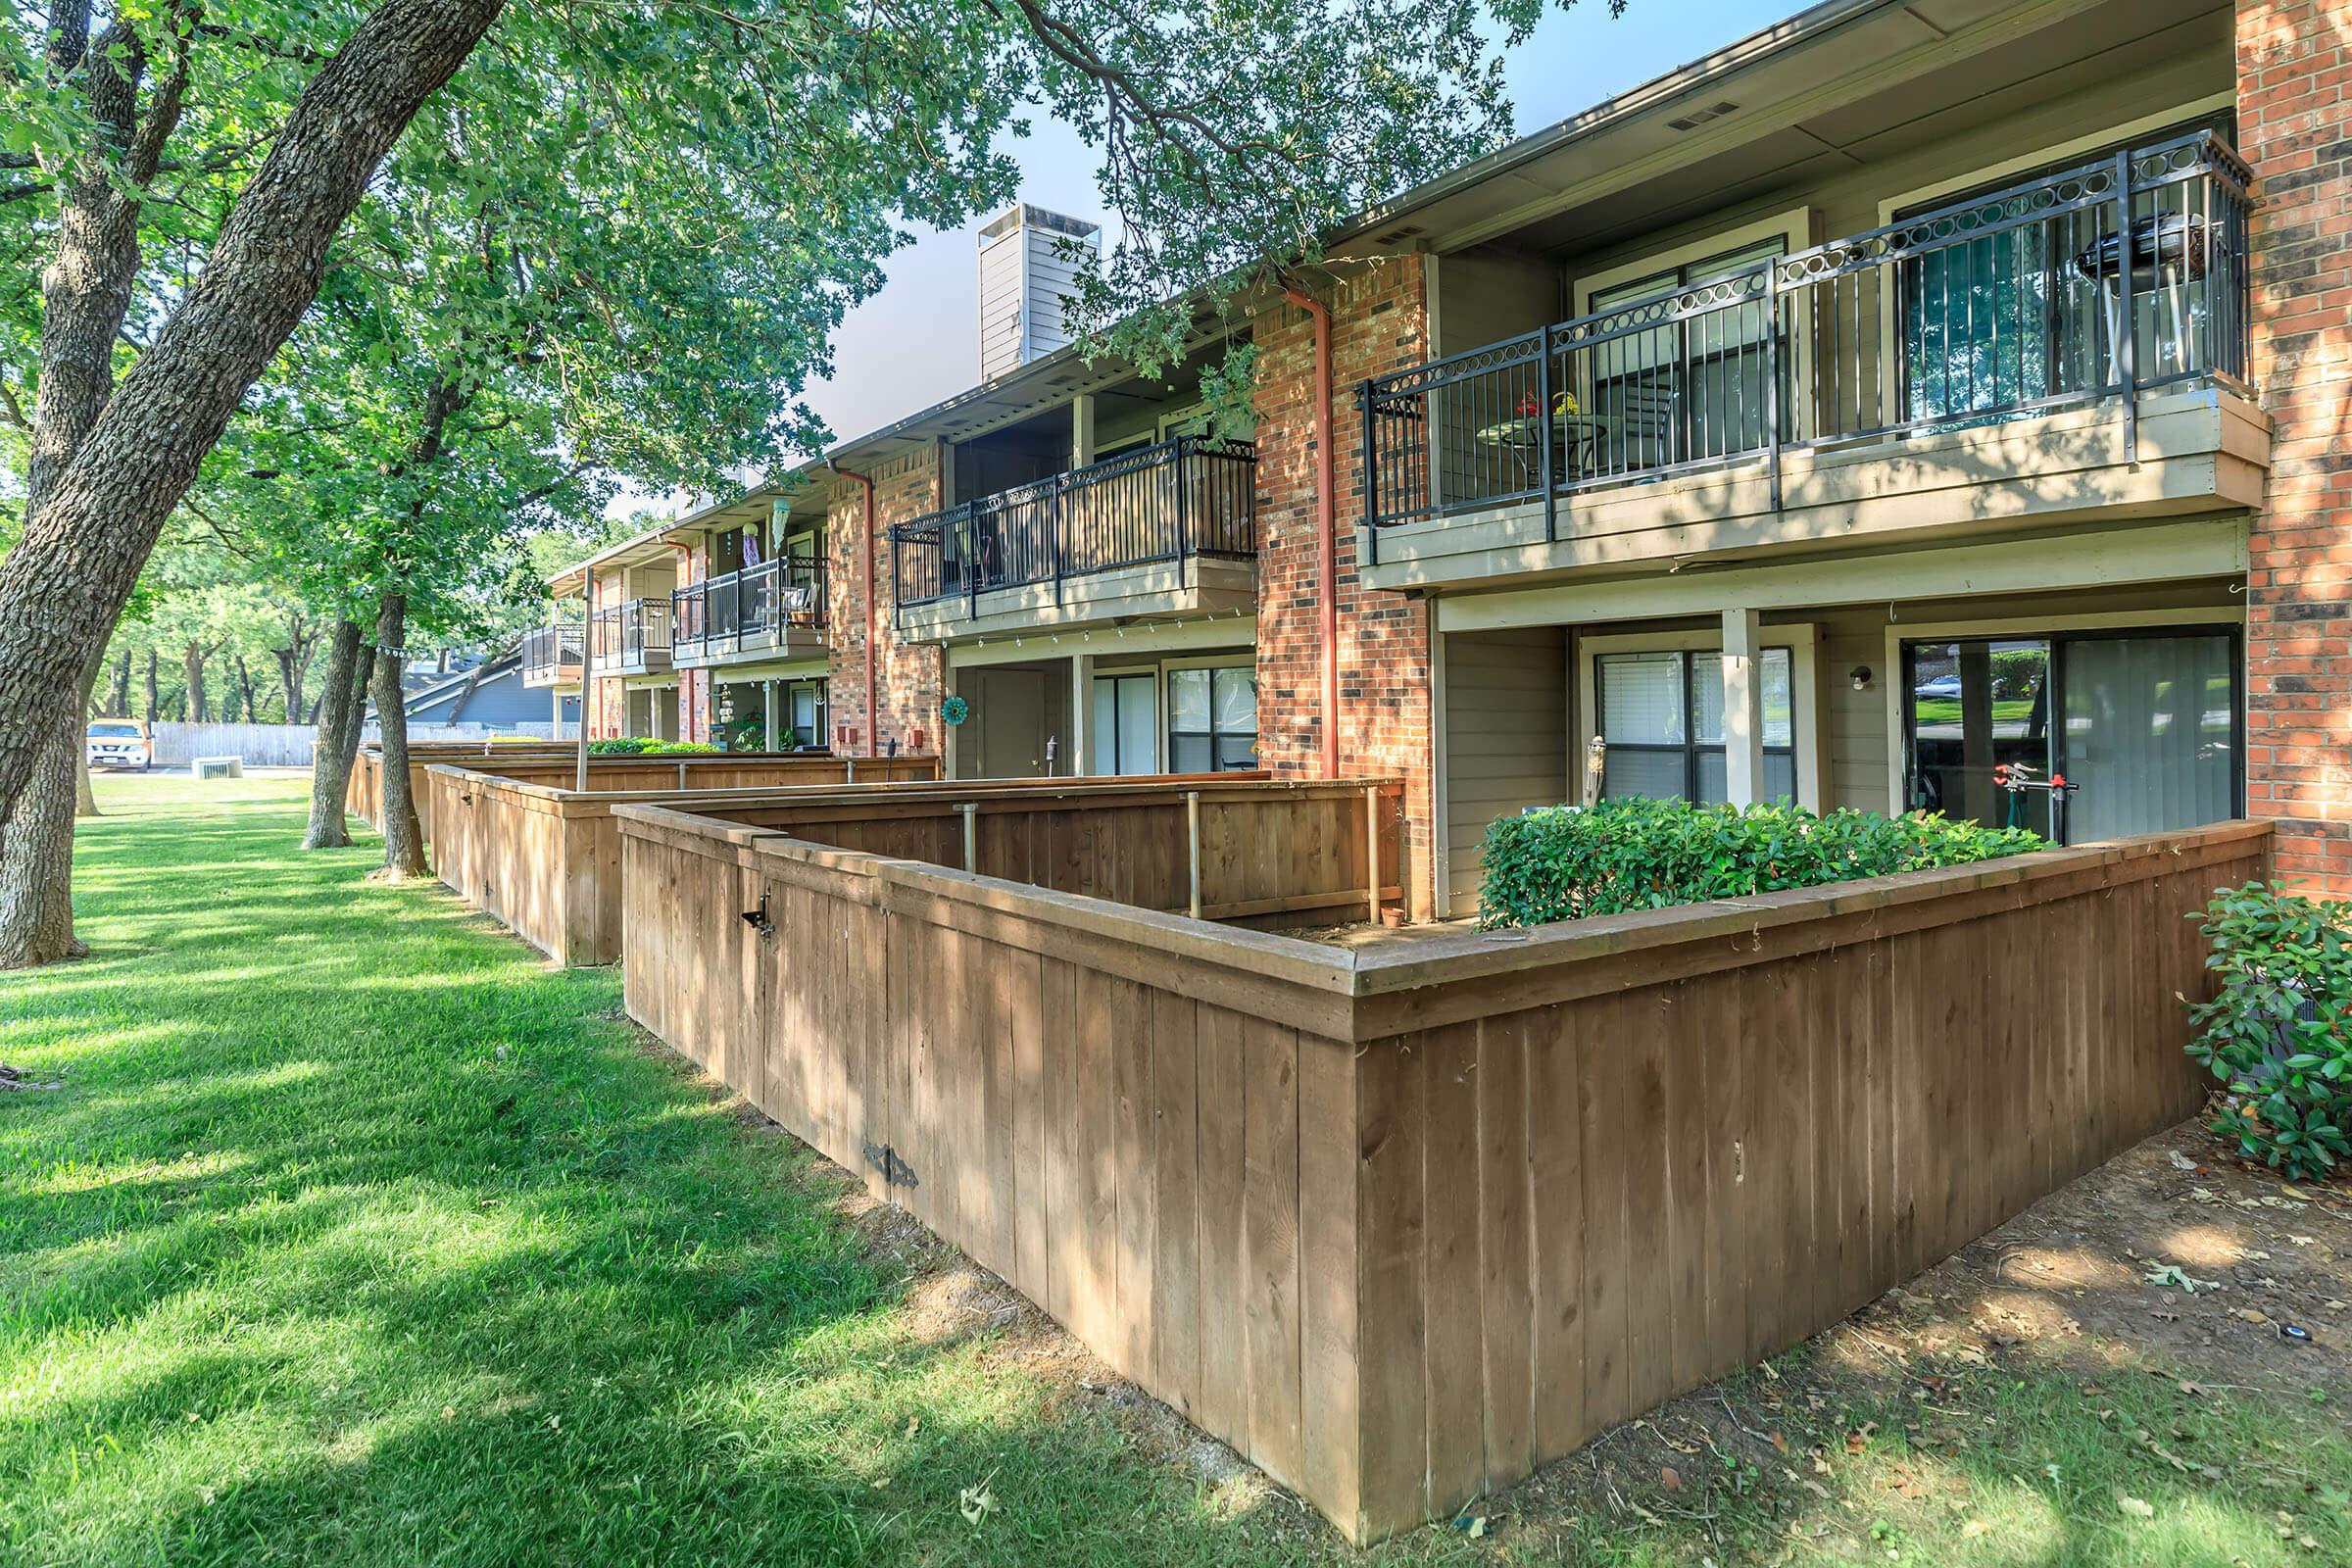 Timberline Condominiums community building with wooden fences